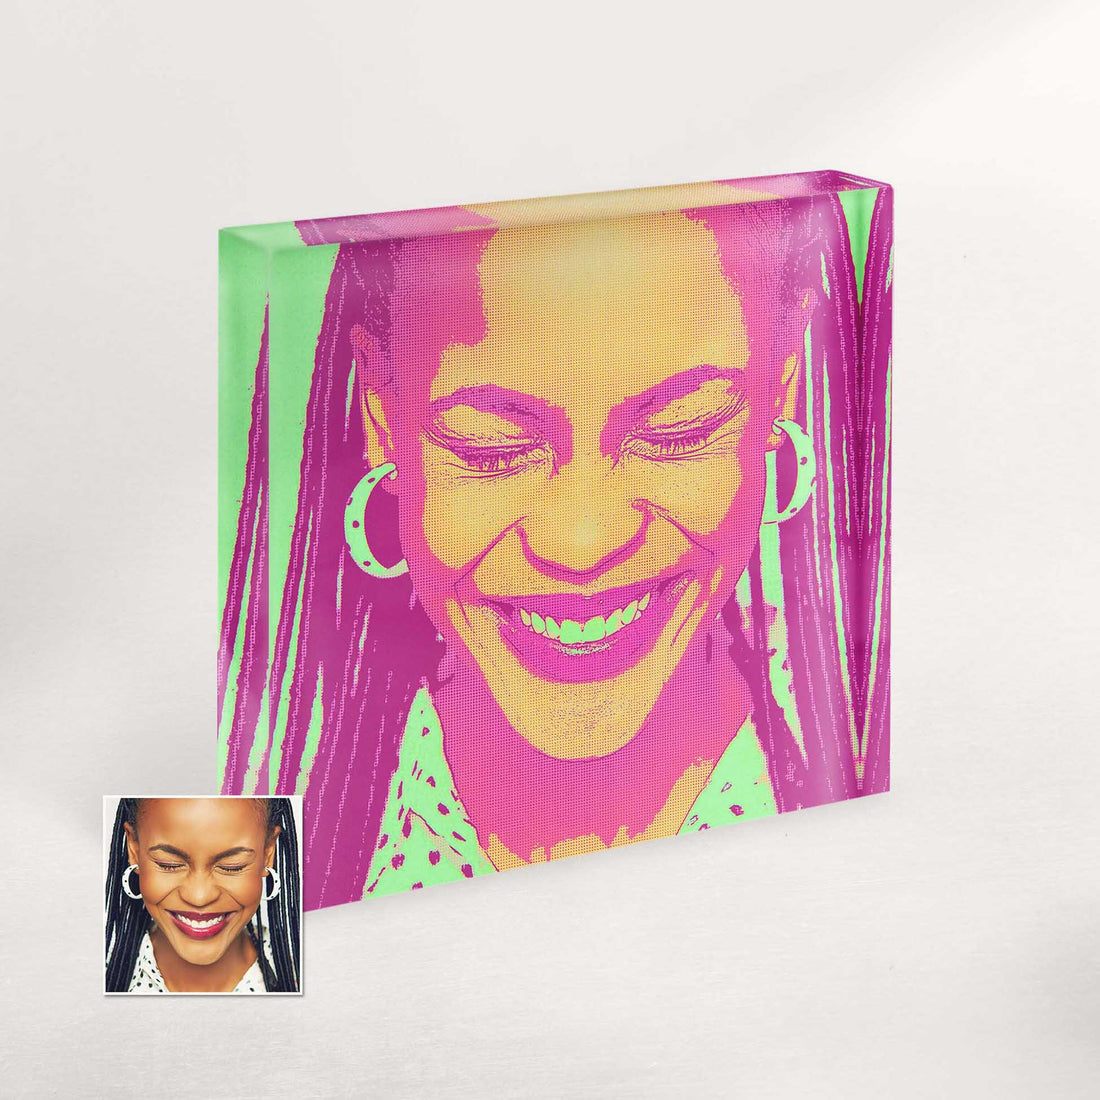 Capture memories in a personalized way with this green and pink pop art acrylic block photo, featuring tailored elements that enhance the contemporary charm of any space